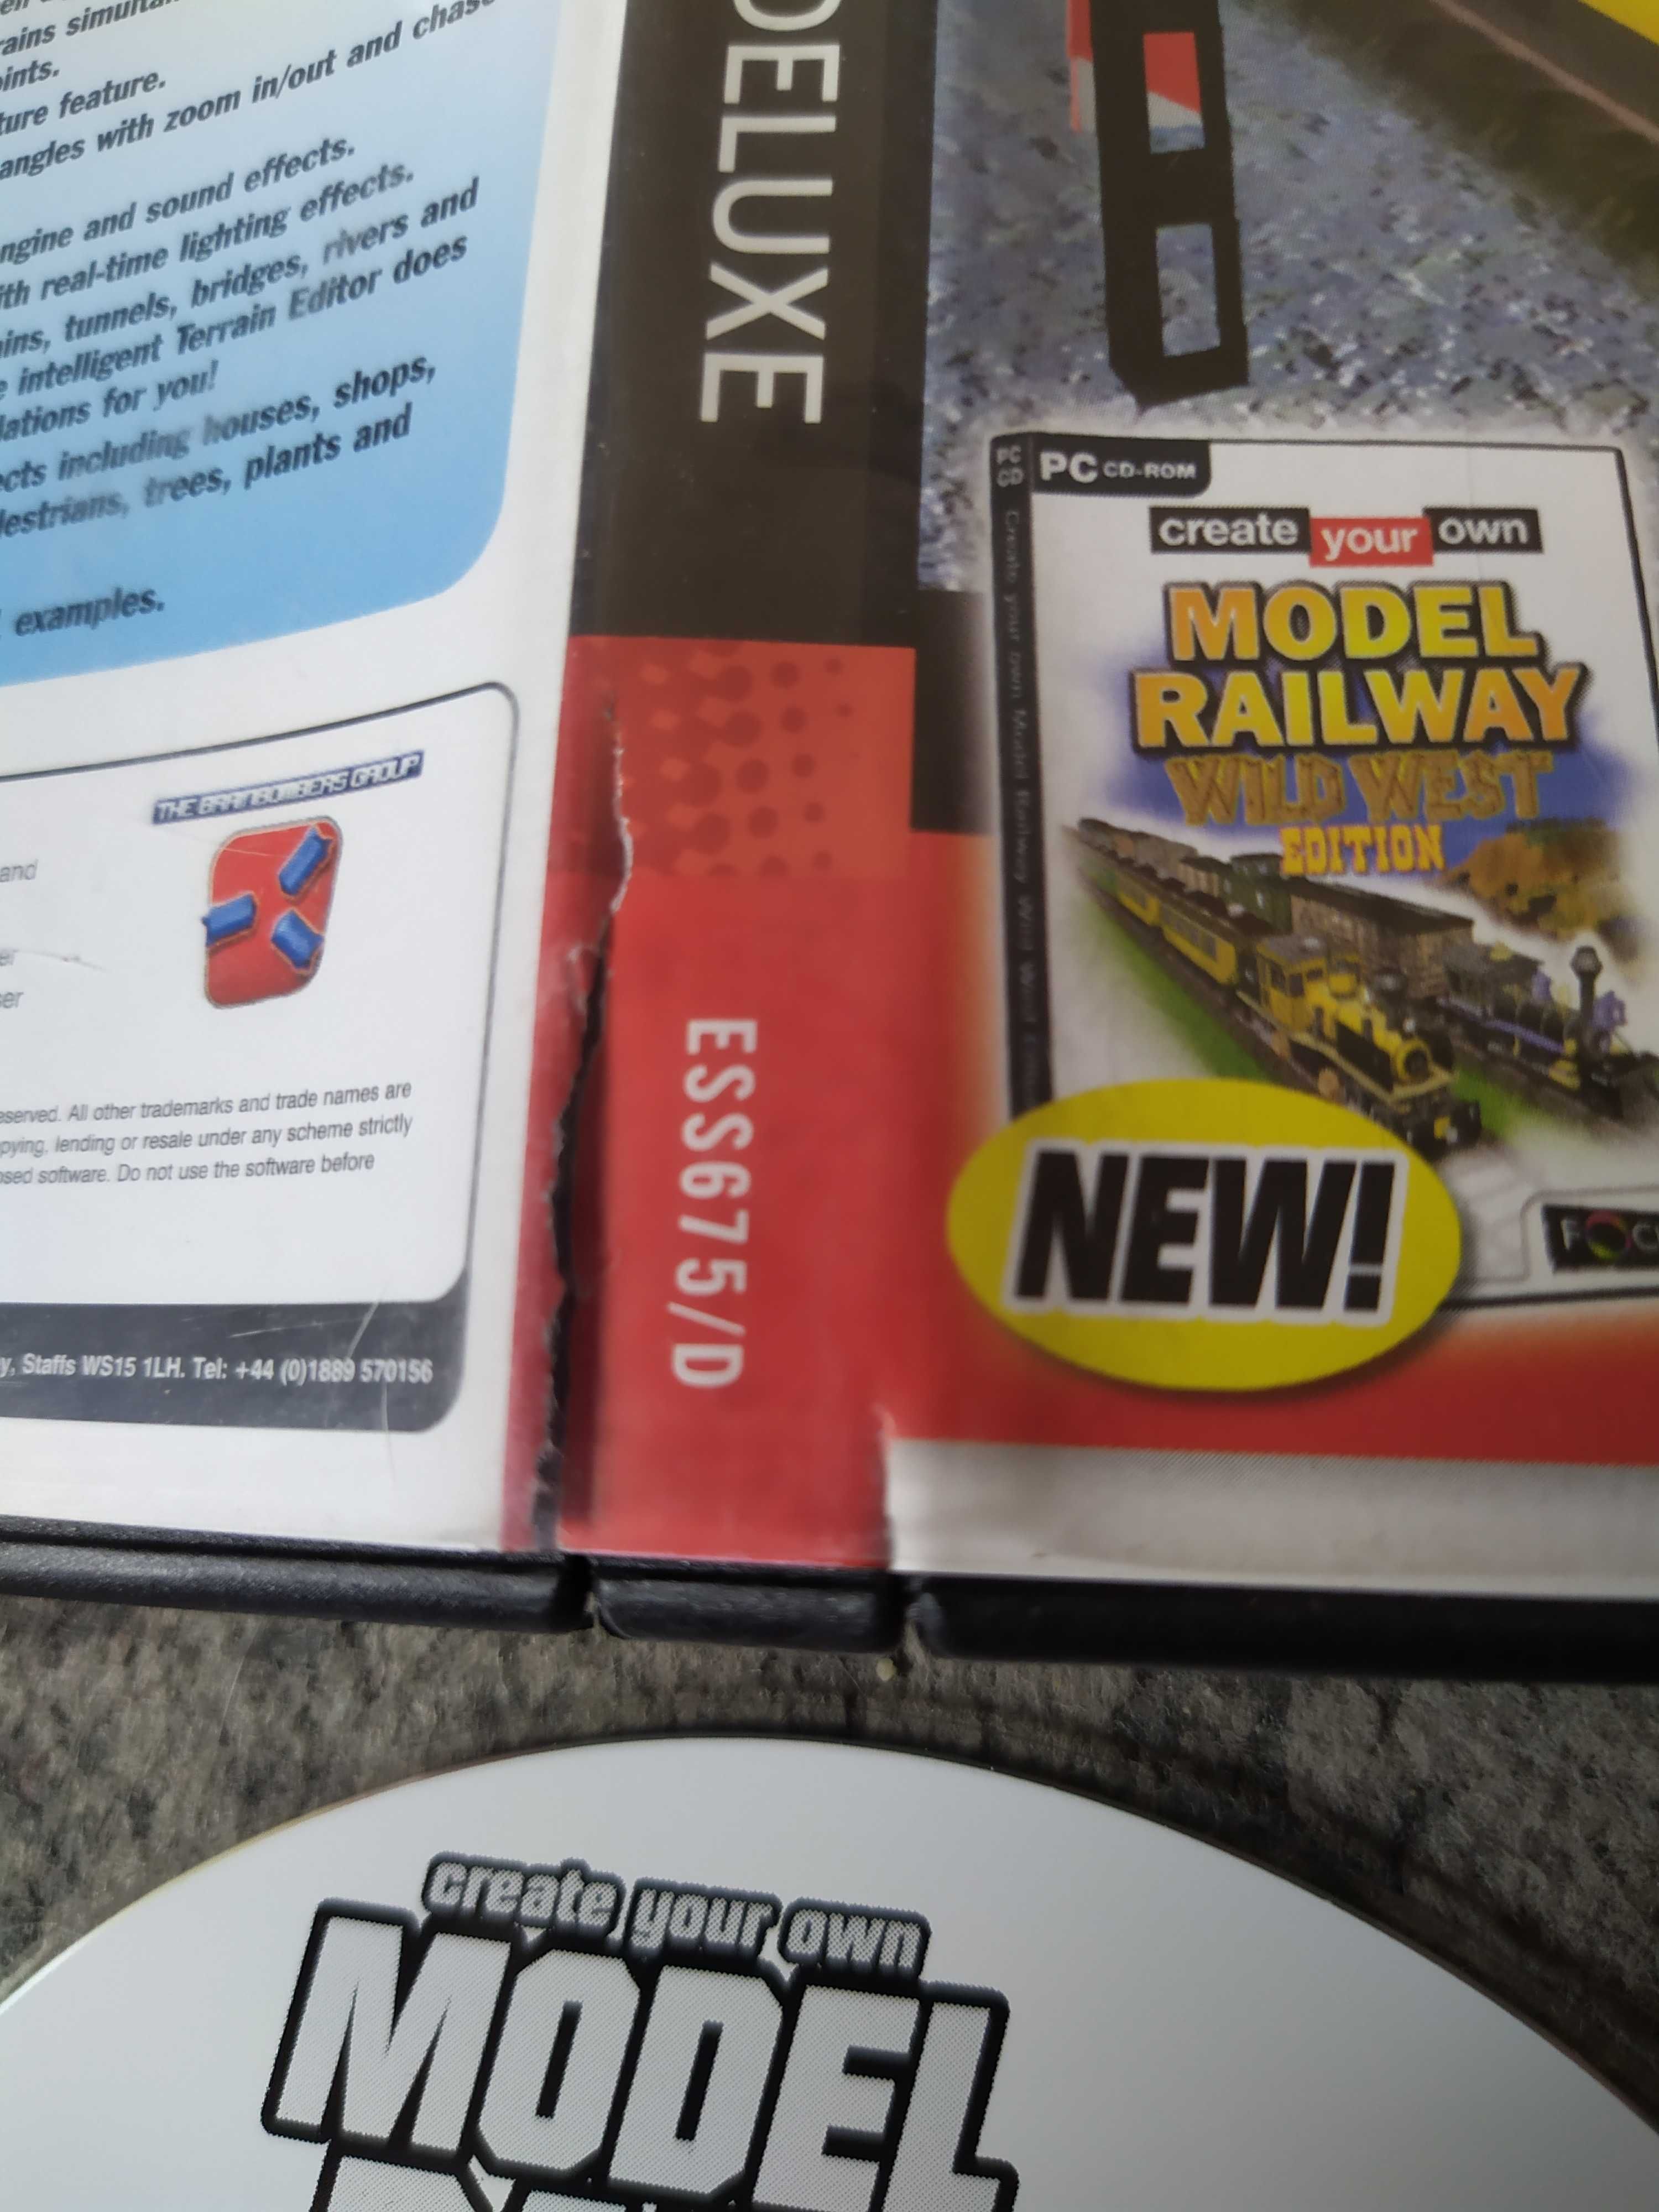 Create your own Model Railway DELUXE PC CD